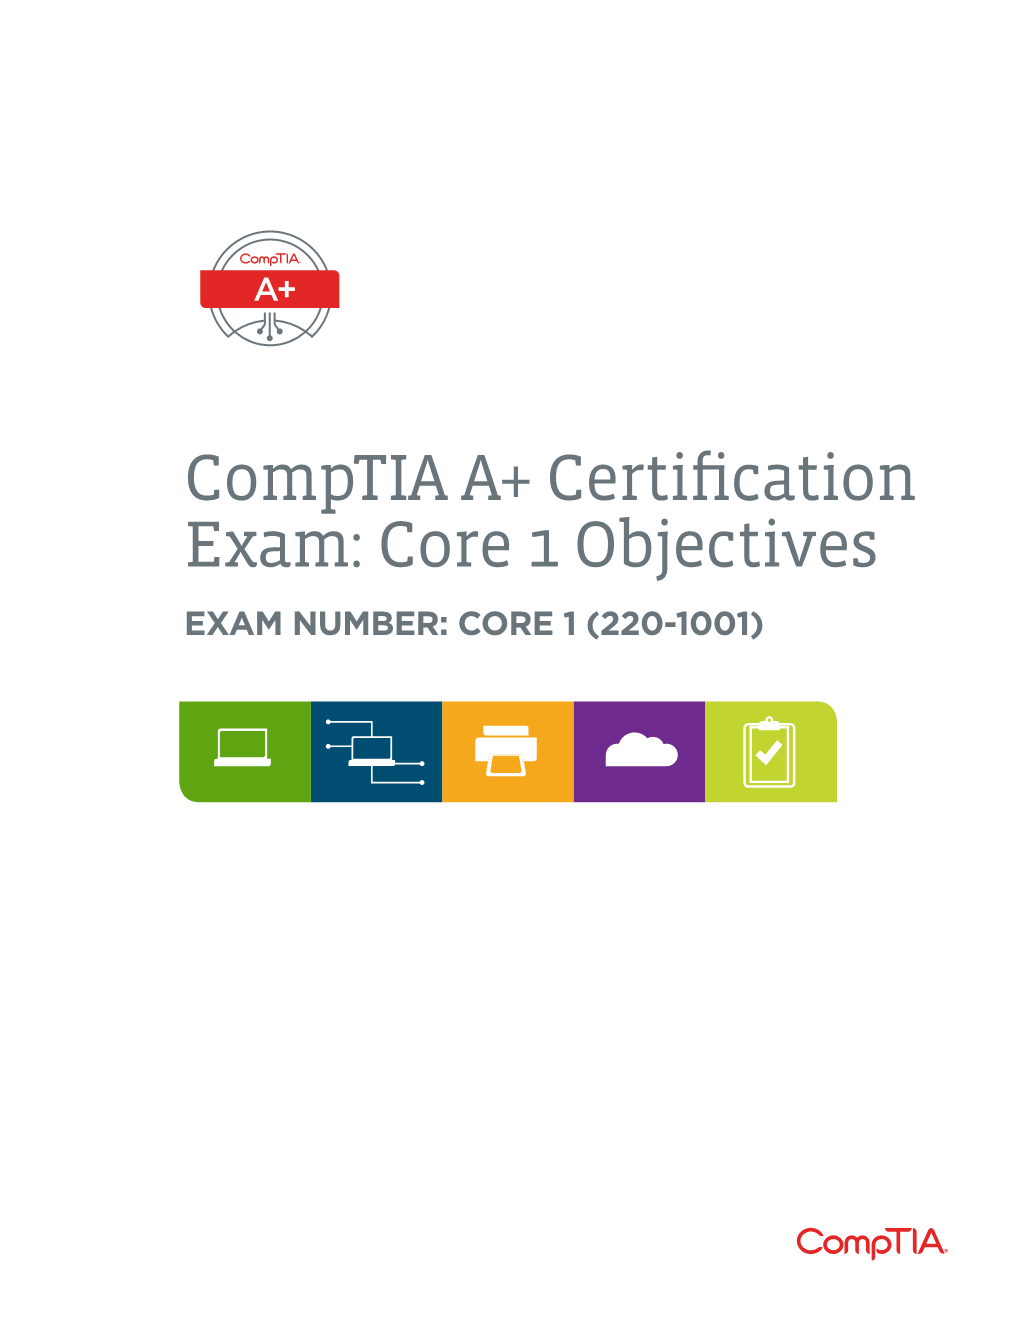 Comptia A+ Certification Exam Objectives